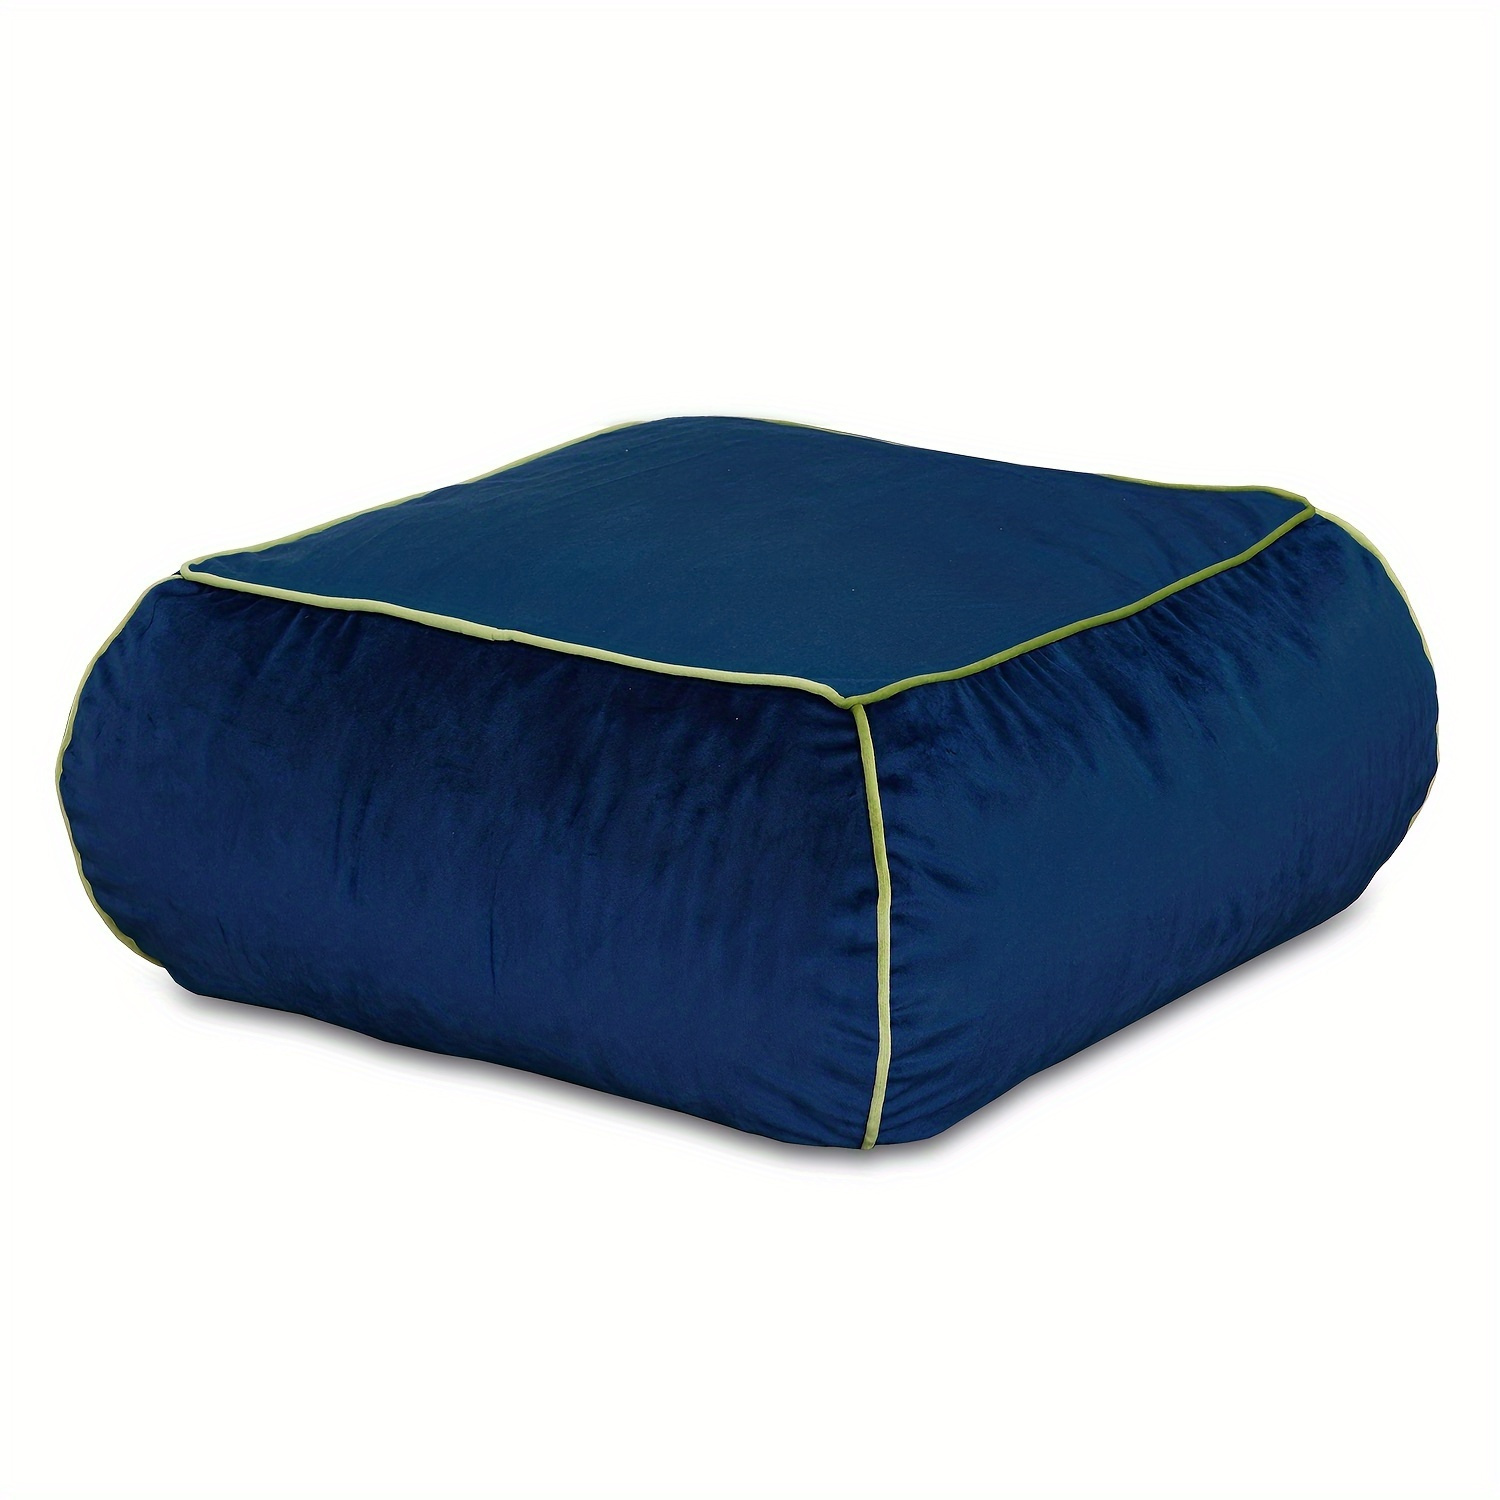 

Thickened Square Cushion, Stuffed Floor Pillow With Memory Foam Beads, Bean Bag Seat, Velvet Fabric Window Cushion, Blue